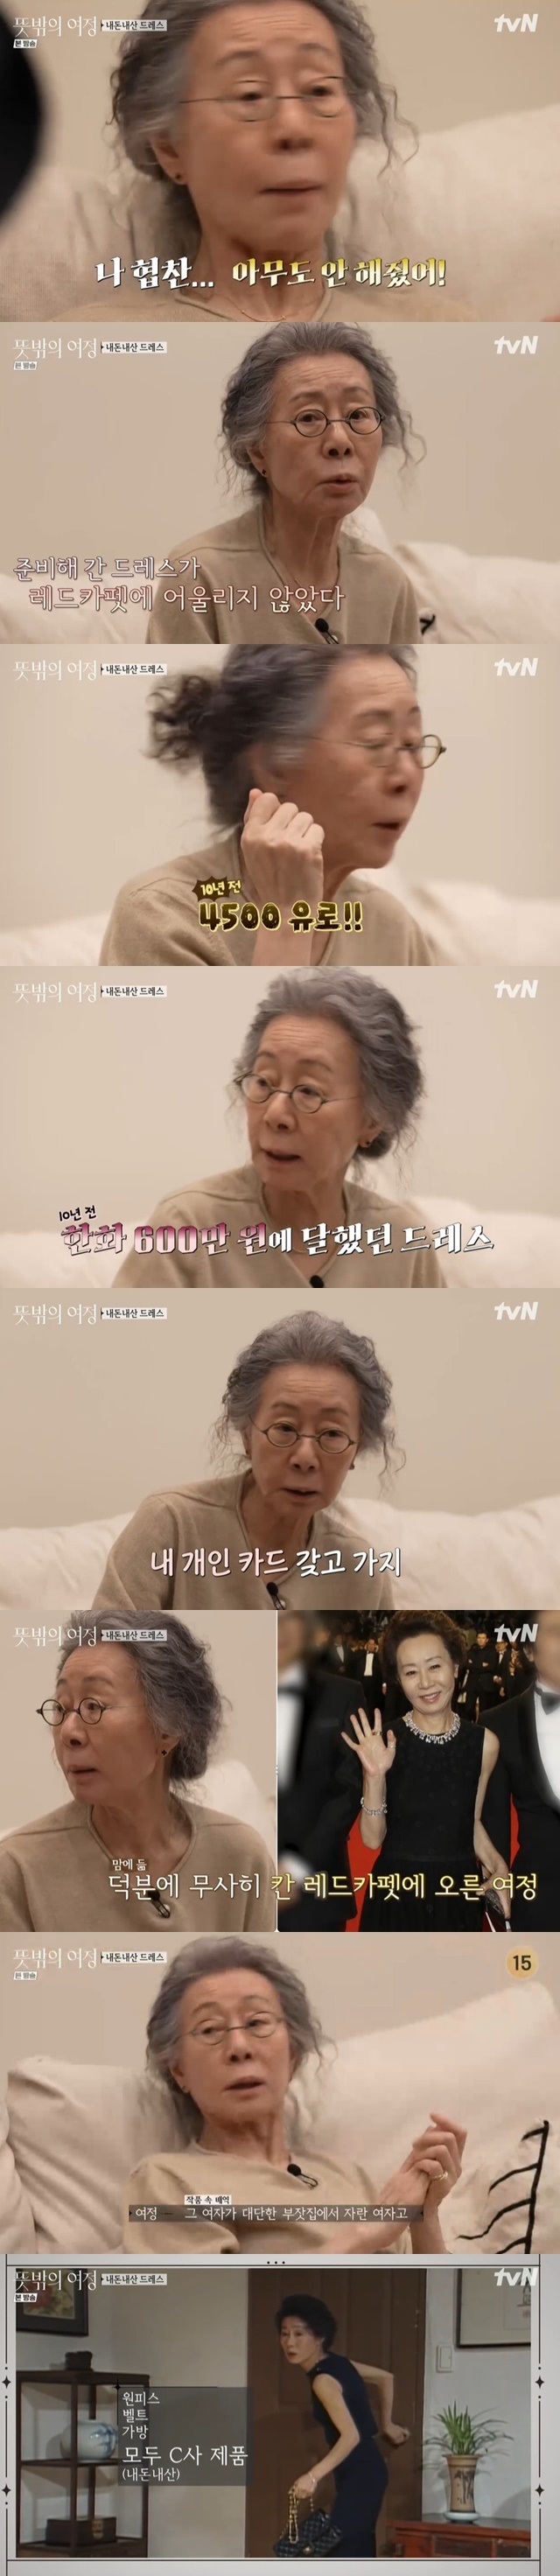 Youn Yuh-jung told the stories about high-priced costumes and said that if he did not act, he would have become a fashion designer.In TVN Unexpected Summertime broadcast on May 8, Na Young-seok PDI was with manager Lee Seo-jin on the United States of America schedule of Actor Youn Yuh-jung.Na Young-Seok Peady joined Lee Seo-jin as manager of Youn Yuh-jung while Actor Youn Yuh-jungs busy United States of America schedule continued.Youn Yuh-jung spent a busy schedule that did not have time to eat the salted rice that he took from Korea, and he sighed as Na Young-Seok Pedi and Lee Seo-jin arrived.The first task of manager Lee Seo-jin is to organize your luggage bag. In your Yuh-jungs carrier, you have a C-dress to wear at the Oscars, and youn Yuh-jung says, I do not like dress.Its not a winner, its a prize winner, its casual. Nobody was so interested in me when I first came, because I didnt win the prize.Lee Seo-jin responded by saying, Im going to wrap it up, and Youn Yuh-jung said, You should not be crumpled. Listen to the adult.You have to walk with this, said Young Yuh-jung, who also blamed the production team for you are the strange ones who chose that child as manager.Lee Seo-jin, who had been interested in playing over the manager role of Youn Yuh-jung from the beginning, was in crisis from the first mission. Lee Seo-jin barely separated the shelf and walked a long dress.Youn Yuh-jung then recalled the A Year Ago in Winter Oscars, saying, It was an unexpected award. Who sponsored clothes when I was no one? There was no offer.He only sponsors best actresses, says he cant win best supporting actresses. Thats what the world is. Oscar is the flower of capitalism.I did not receive sponsorship for A Year Ago in Winter, he said.Youn Yuh-jung said, My son just asked me to bring it home. What my mother wore.I did not sponsor anyone, he said. I bought the best nosebleed. I picked up the dress I bought on the day of the Cannes Film Festival more than 10 years ago.The dress that you Yuh-jung took did not match, so the stylist found the dress on the day of the awards ceremony.Youn Yuh-jung said, I found your dress here, sir, and its 4,500 euros. Six million won. Quickly bring the card.But she doesnt even speak English language, so how did she hold it?He said he did. He knew me. He paid me the same day, I bought it, and I cut the road.Its a dress I wore with a time-drying.The crew said, You did well.When asked about other costumes, Youn Yuh-jung said, I bought it for 5.5 million won for my coat to wear clothes. I was a rich woman with a great role of justification.I was short of money. I didnt have a stylist. What stylists were there in those days?